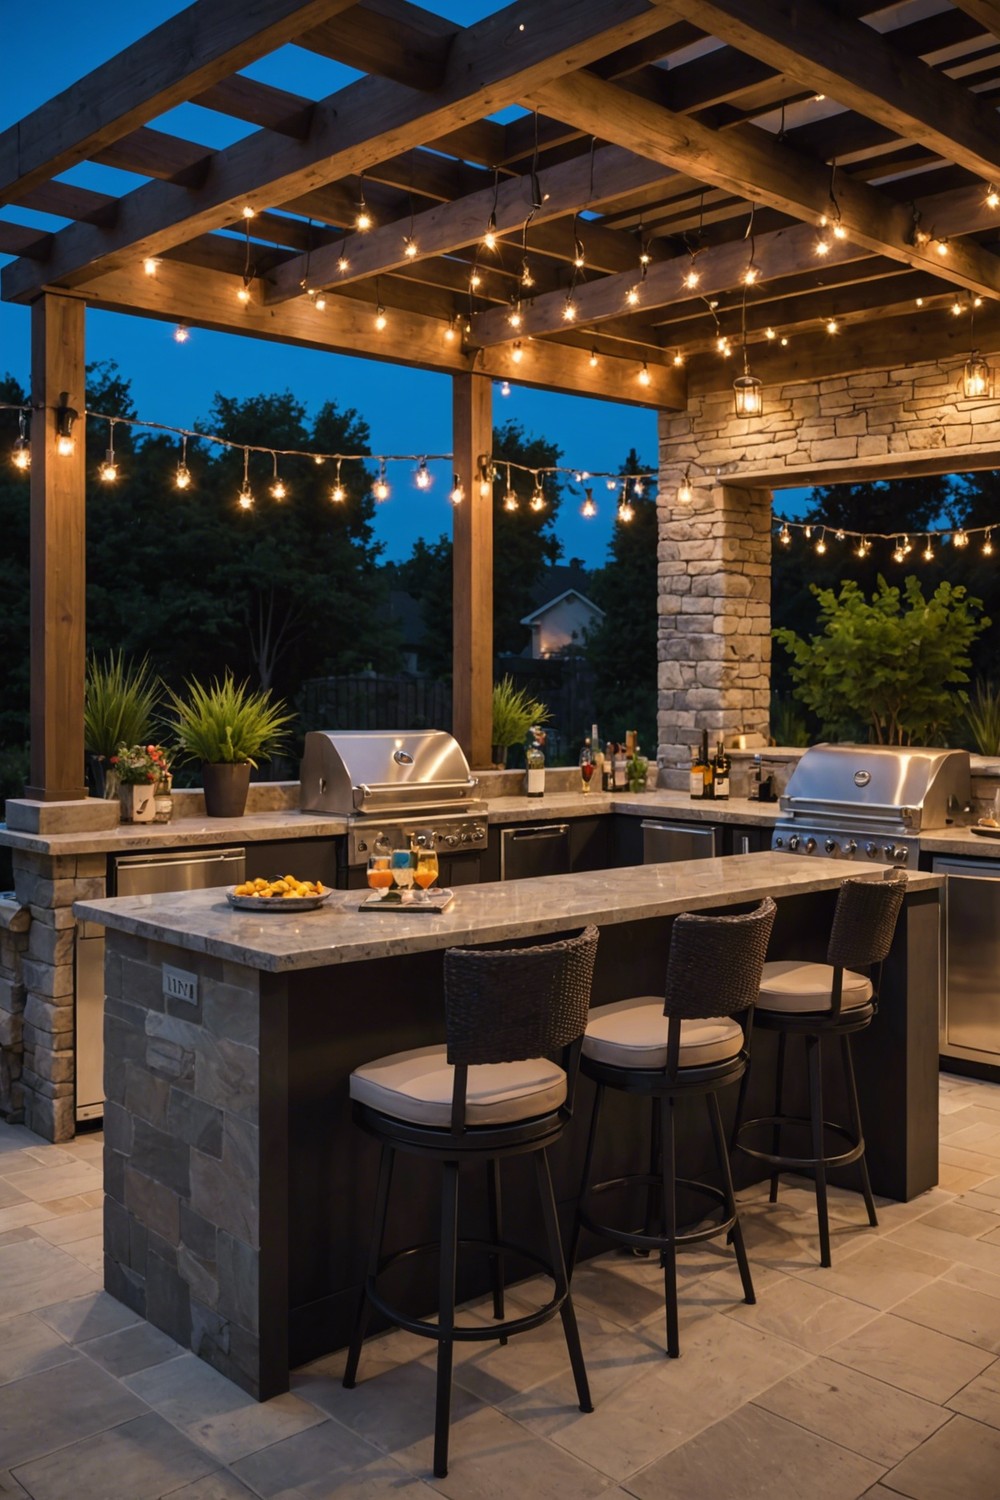 Outdoor Kitchens with Built-in Bars